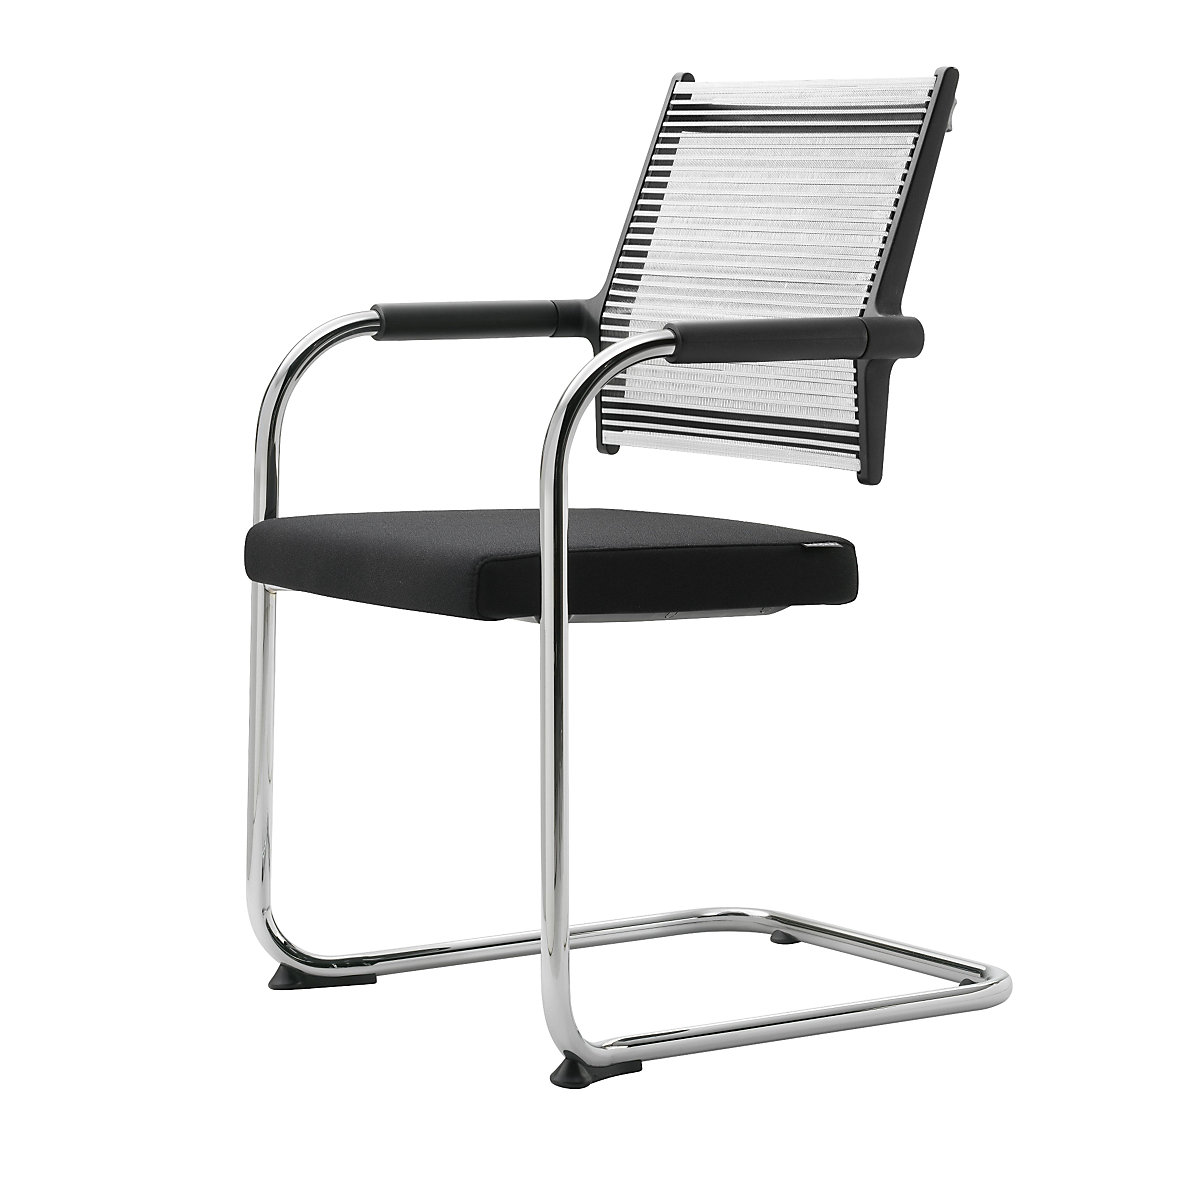 LORDO cantilever chair - Dauphin